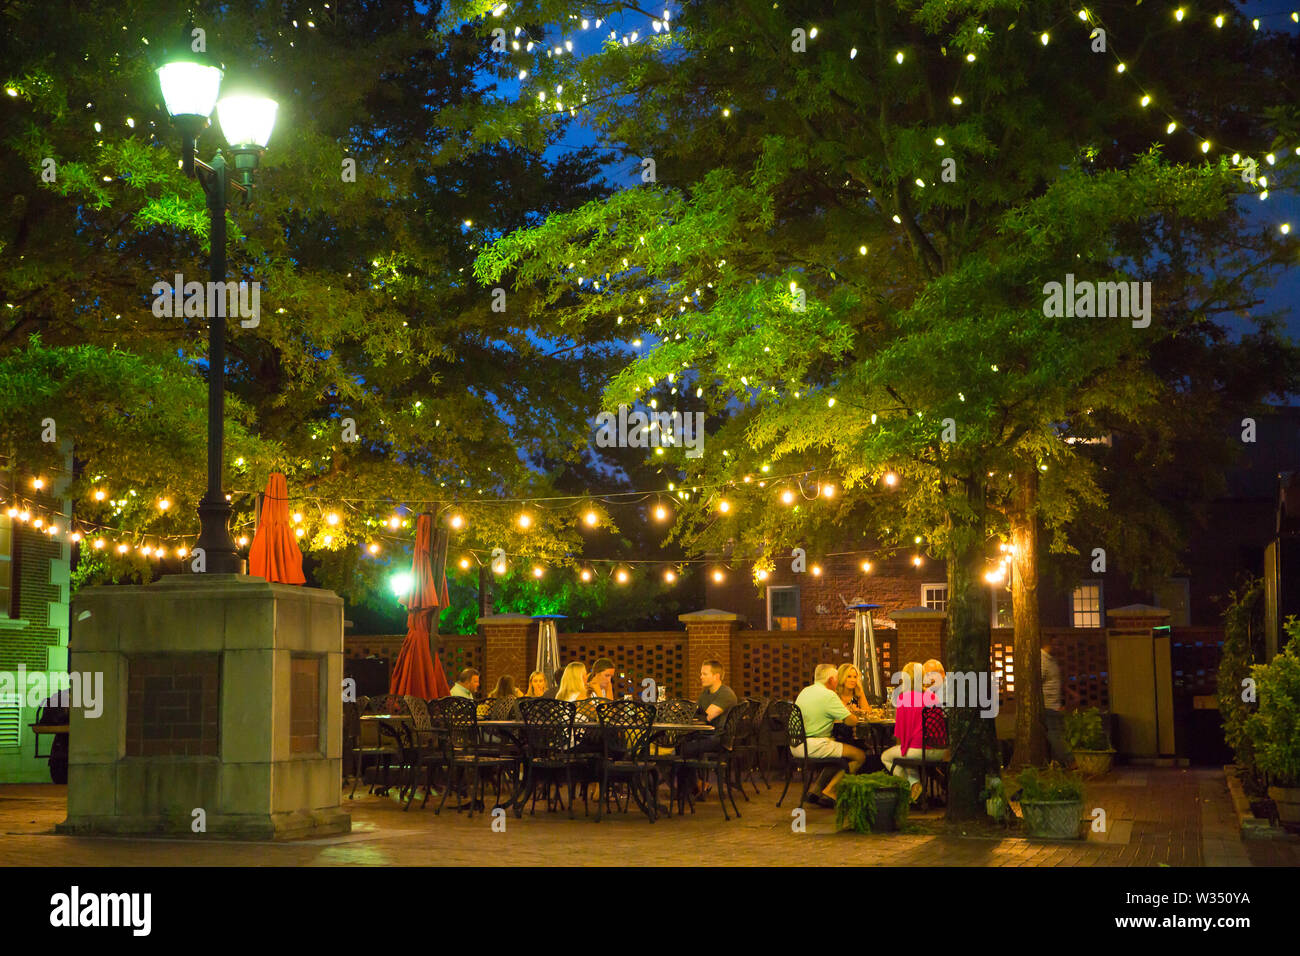 GREENVILLE, SC (USA) - July 5, 2019:  People eating at an outdoor cafe after dark in downtown Greenville. Stock Photo